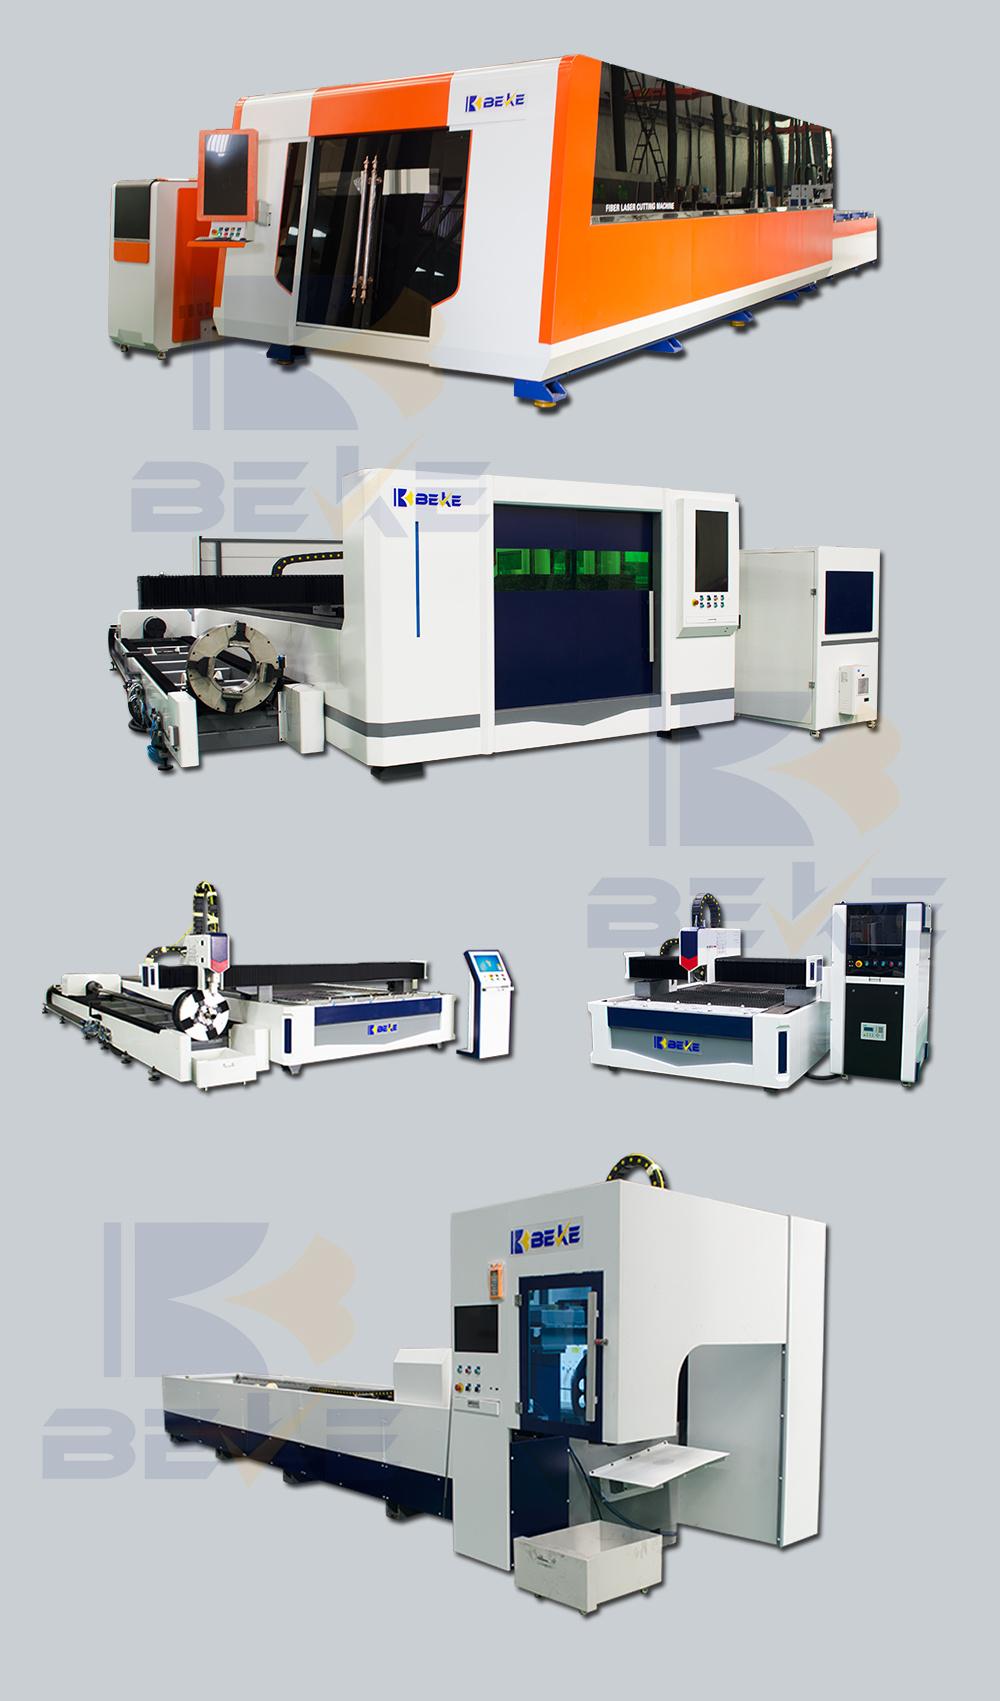 Closed Double Tables Exchangeable CNC Laser Steel Sheet Cutting Machine Sale Online